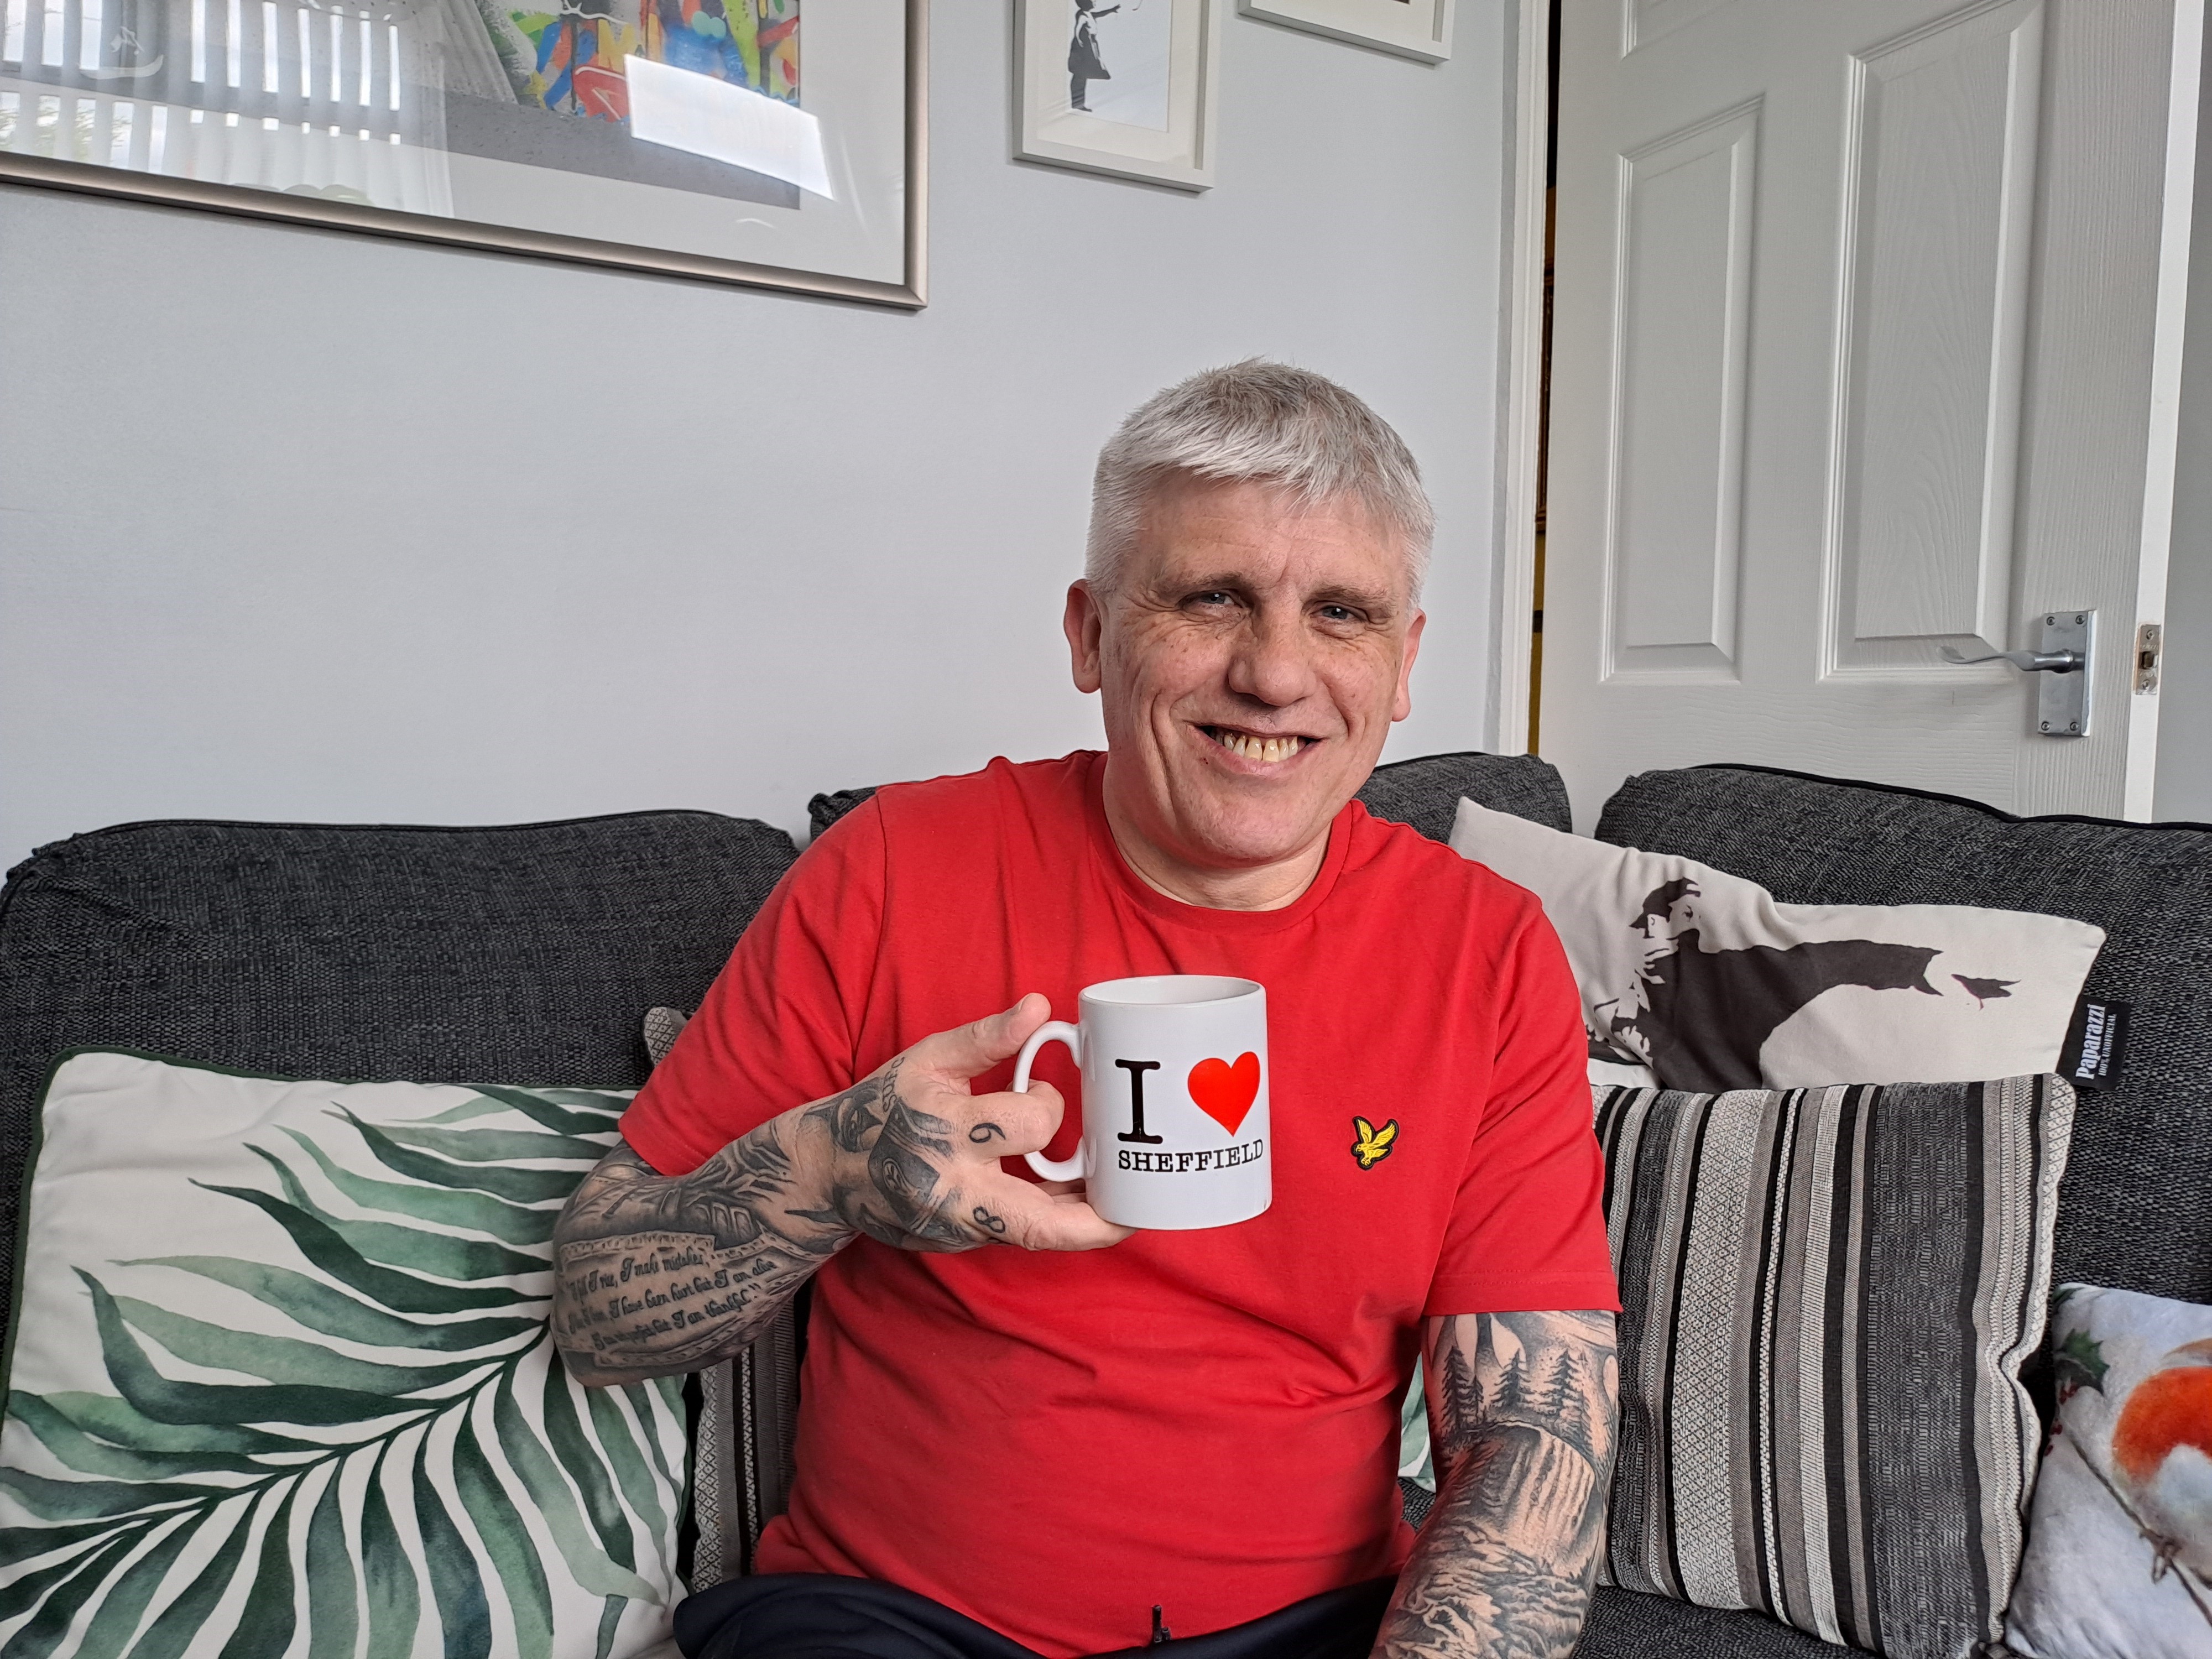 A smiling Mick Lewis enjoys a cup of tea on a sofa in a living room from a mug saying 'I Love Sheffield'